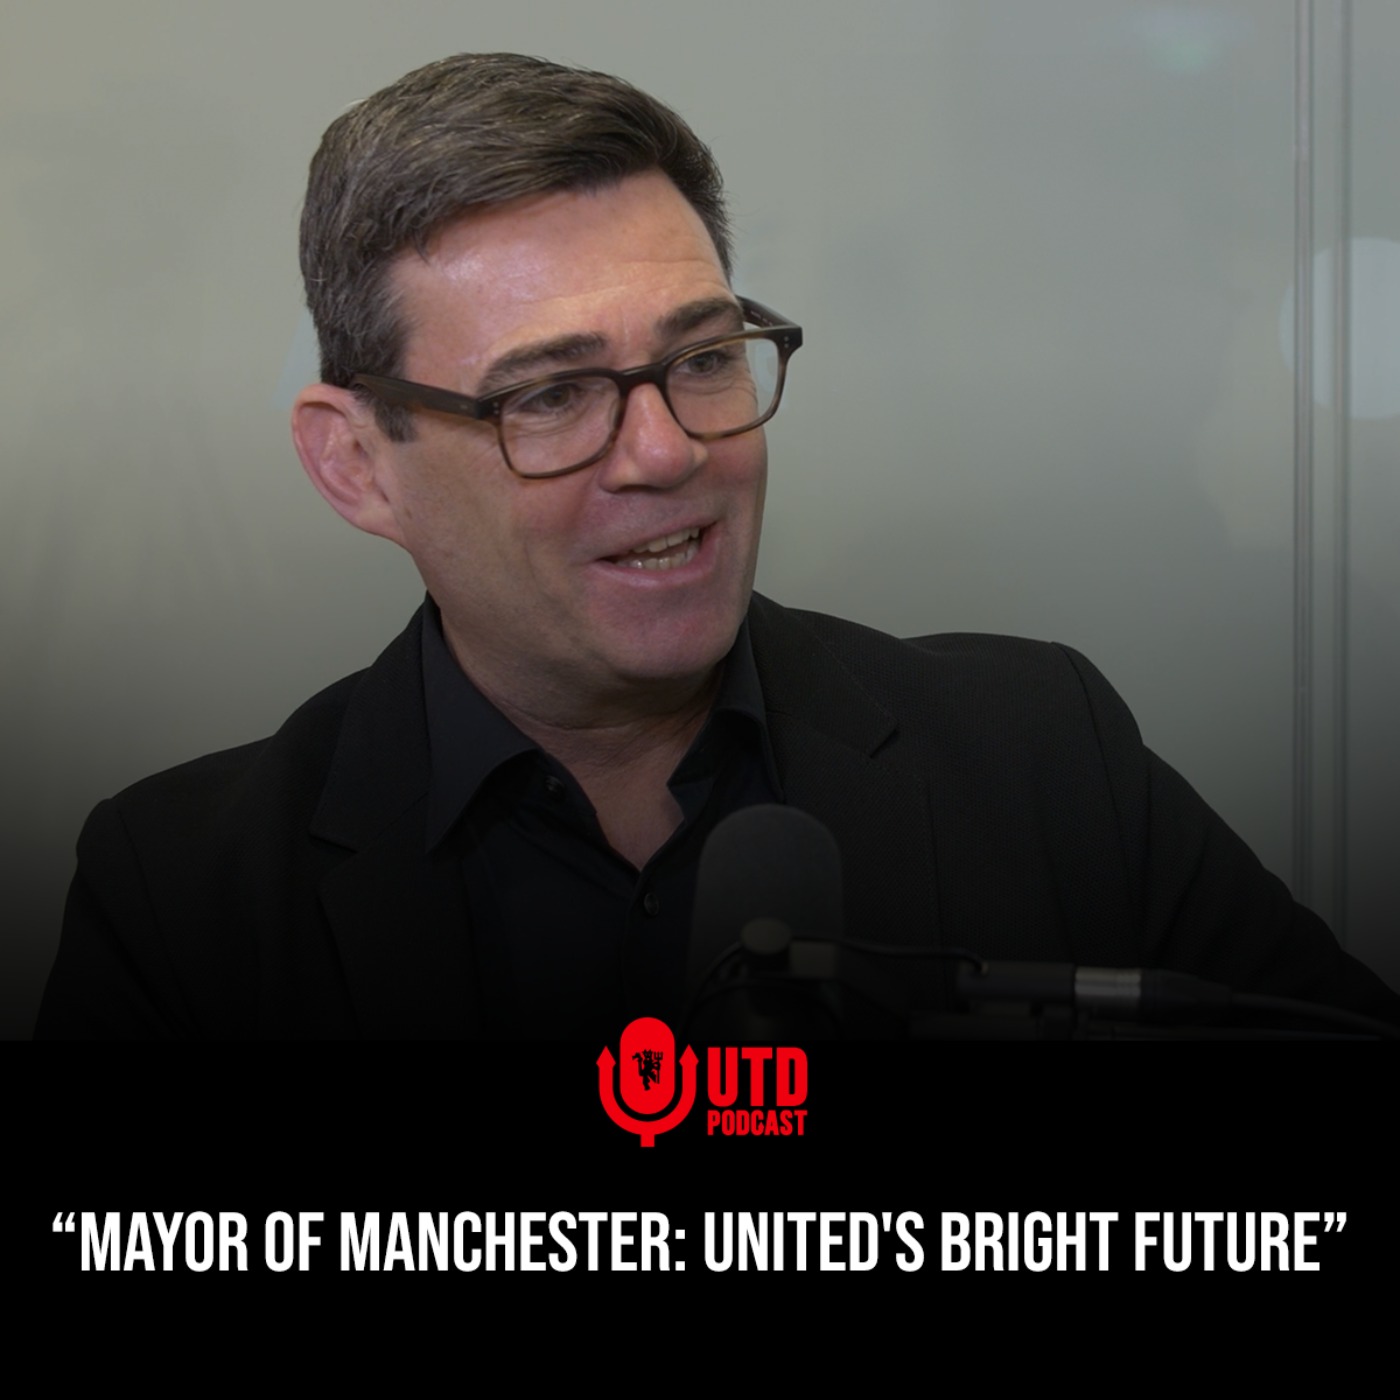 The Mayor of Manchester: United’s Bright Future